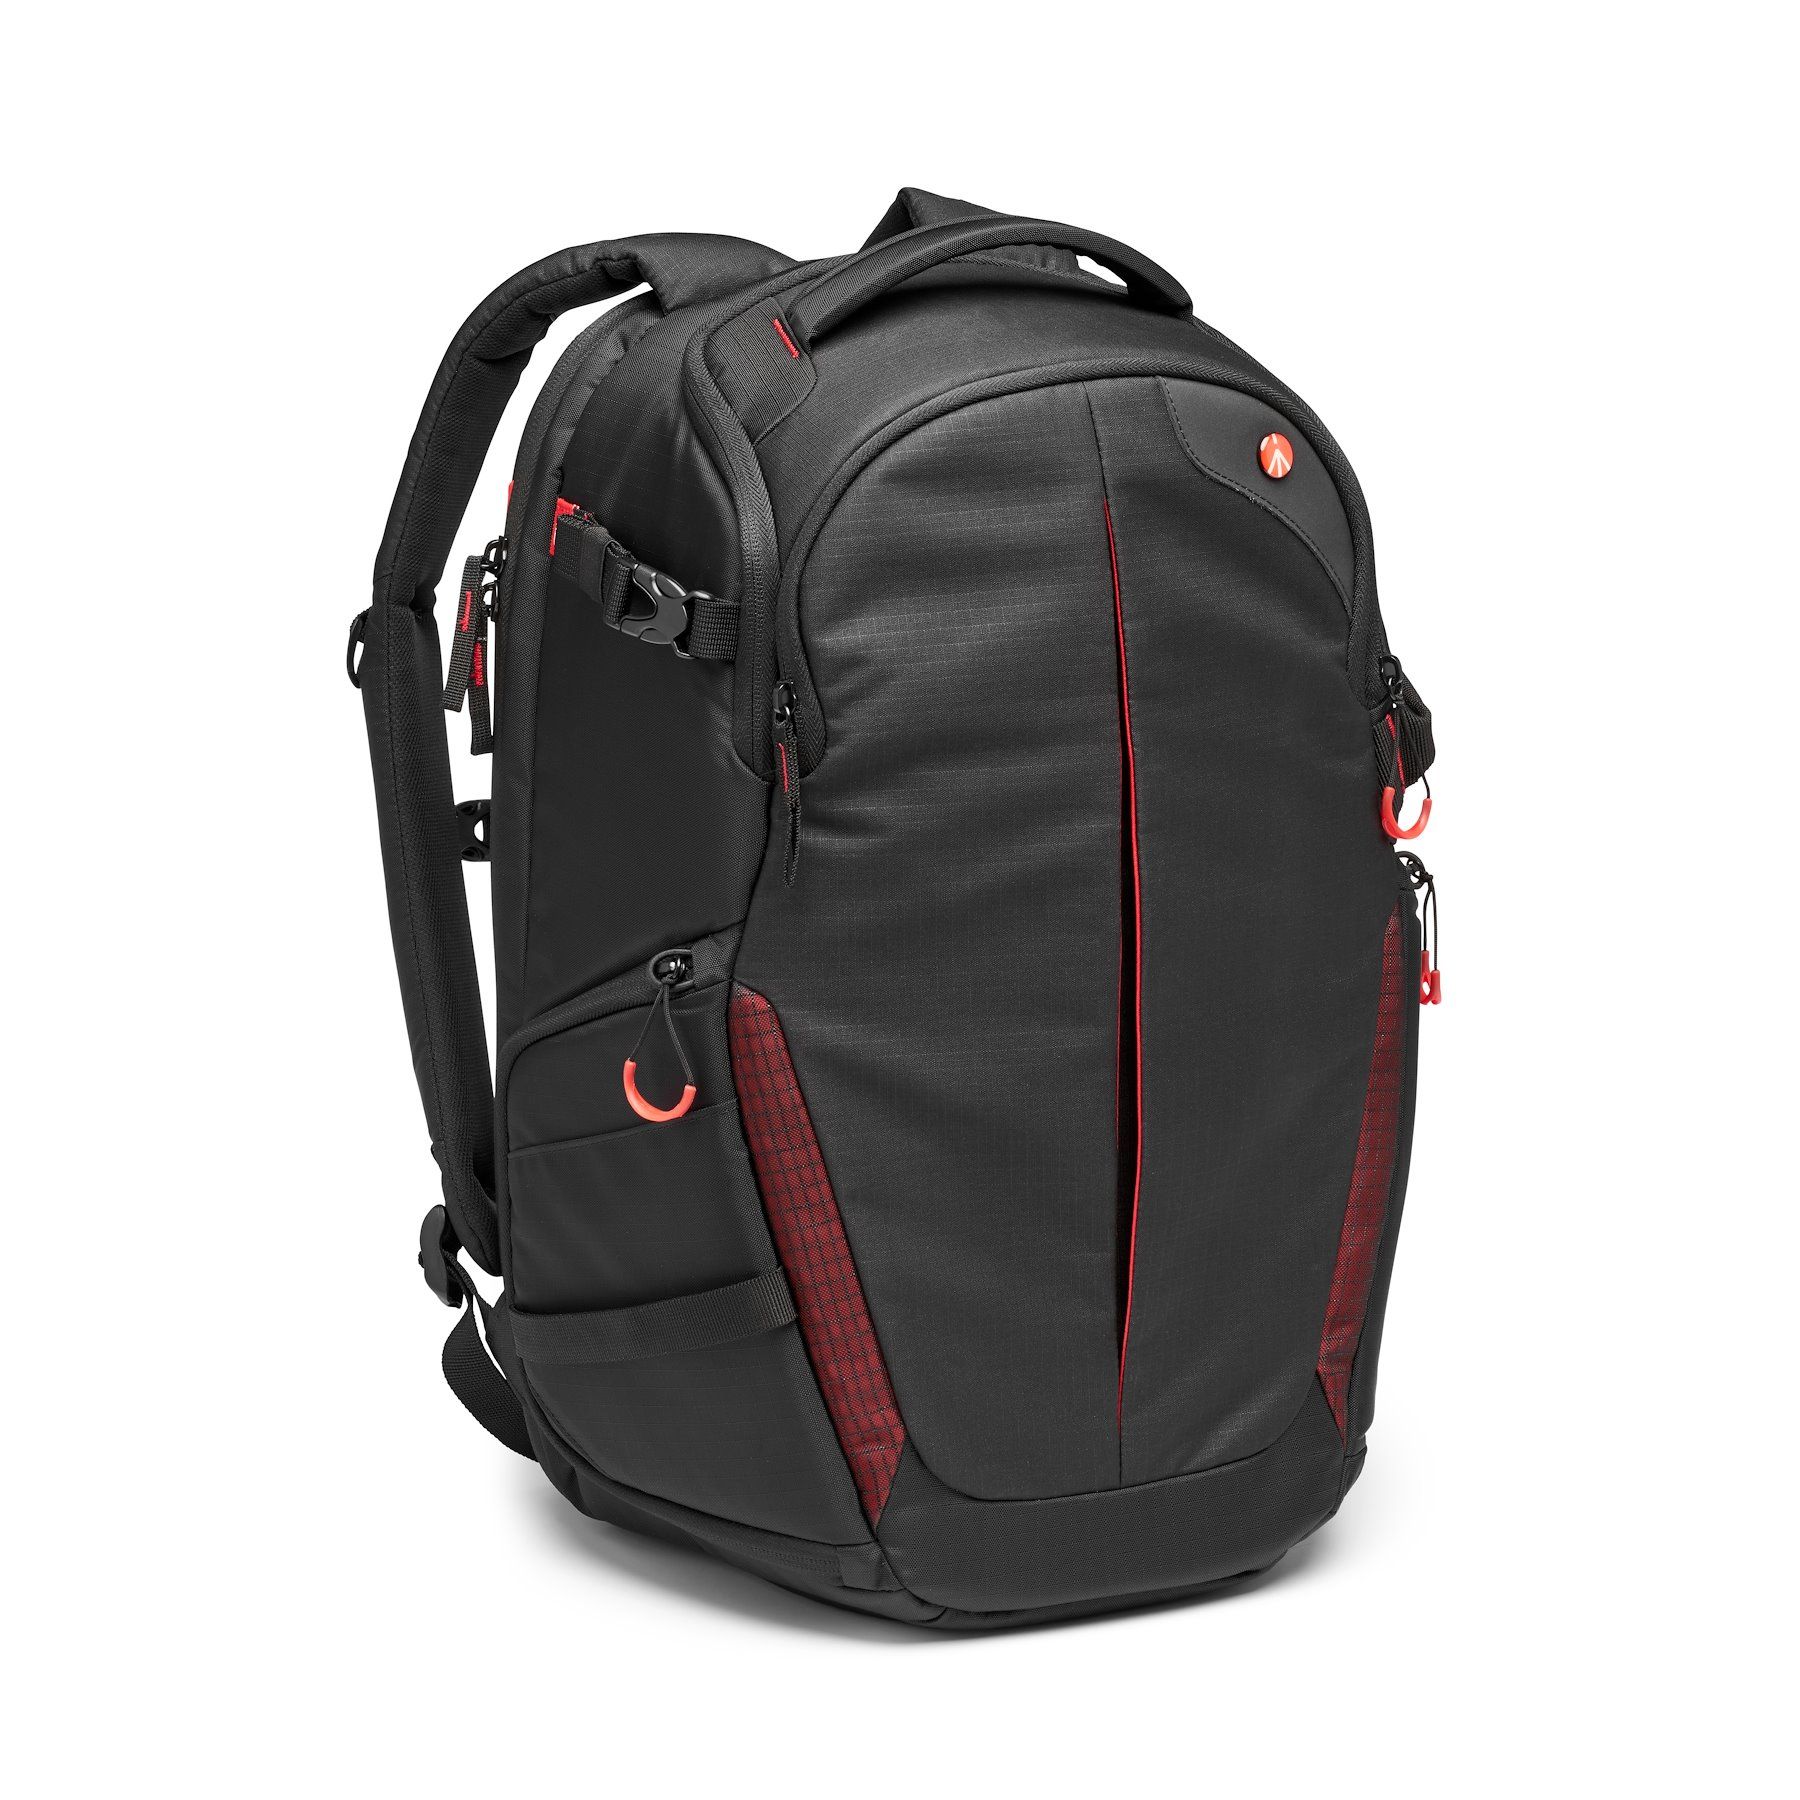 Manfrotto Pro Light backpack RedBee-310 for DSLR/c